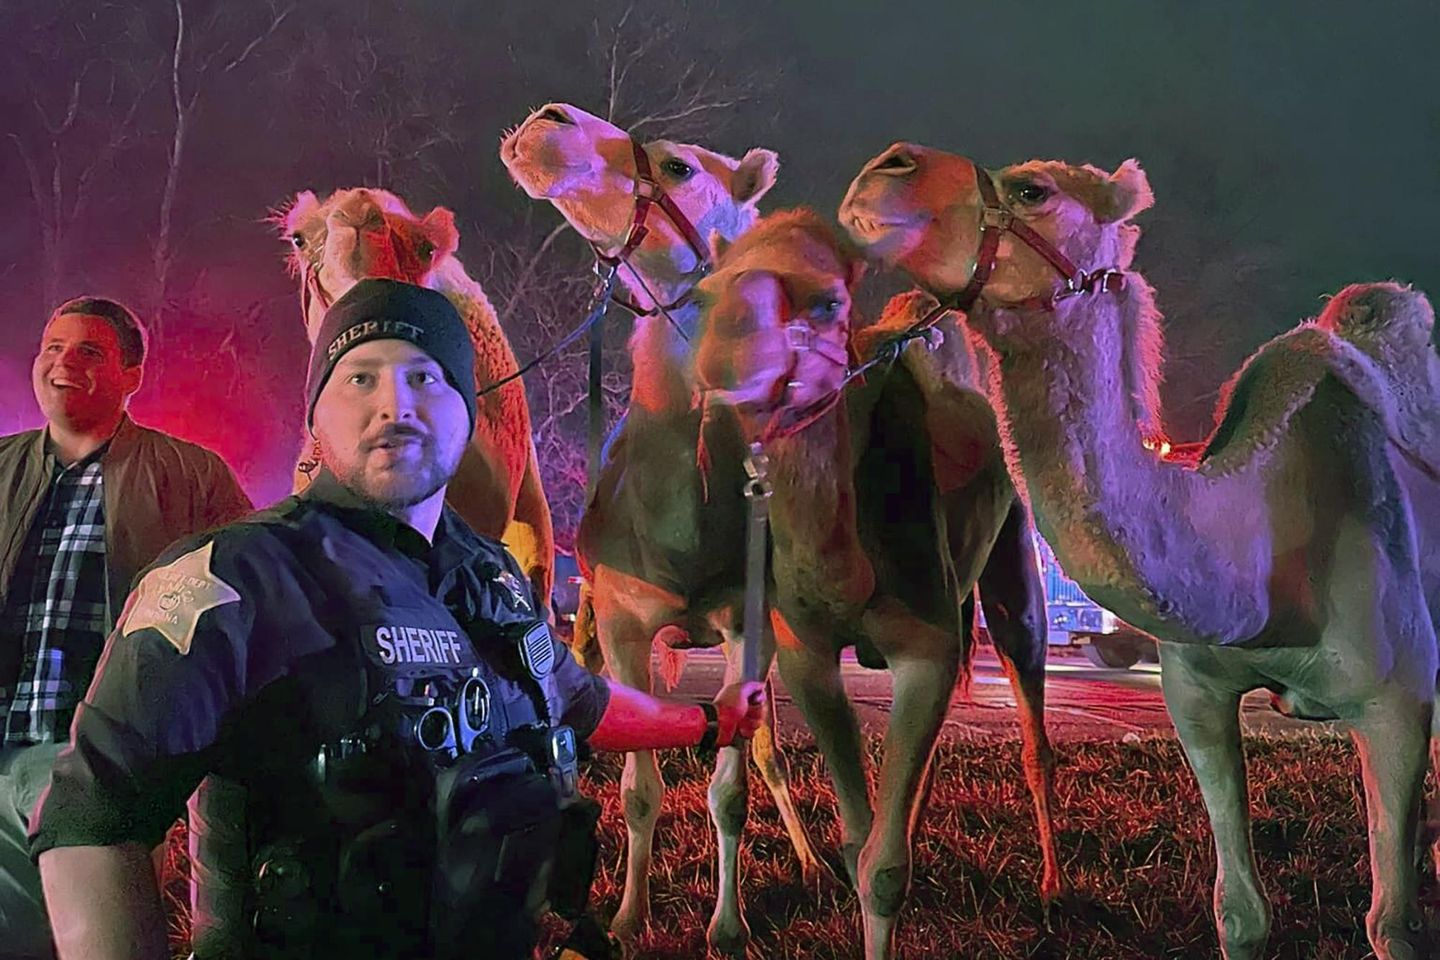 Zebras, camels and flames, oh my! Circus animals rescued after truck catches fire on Indiana highway